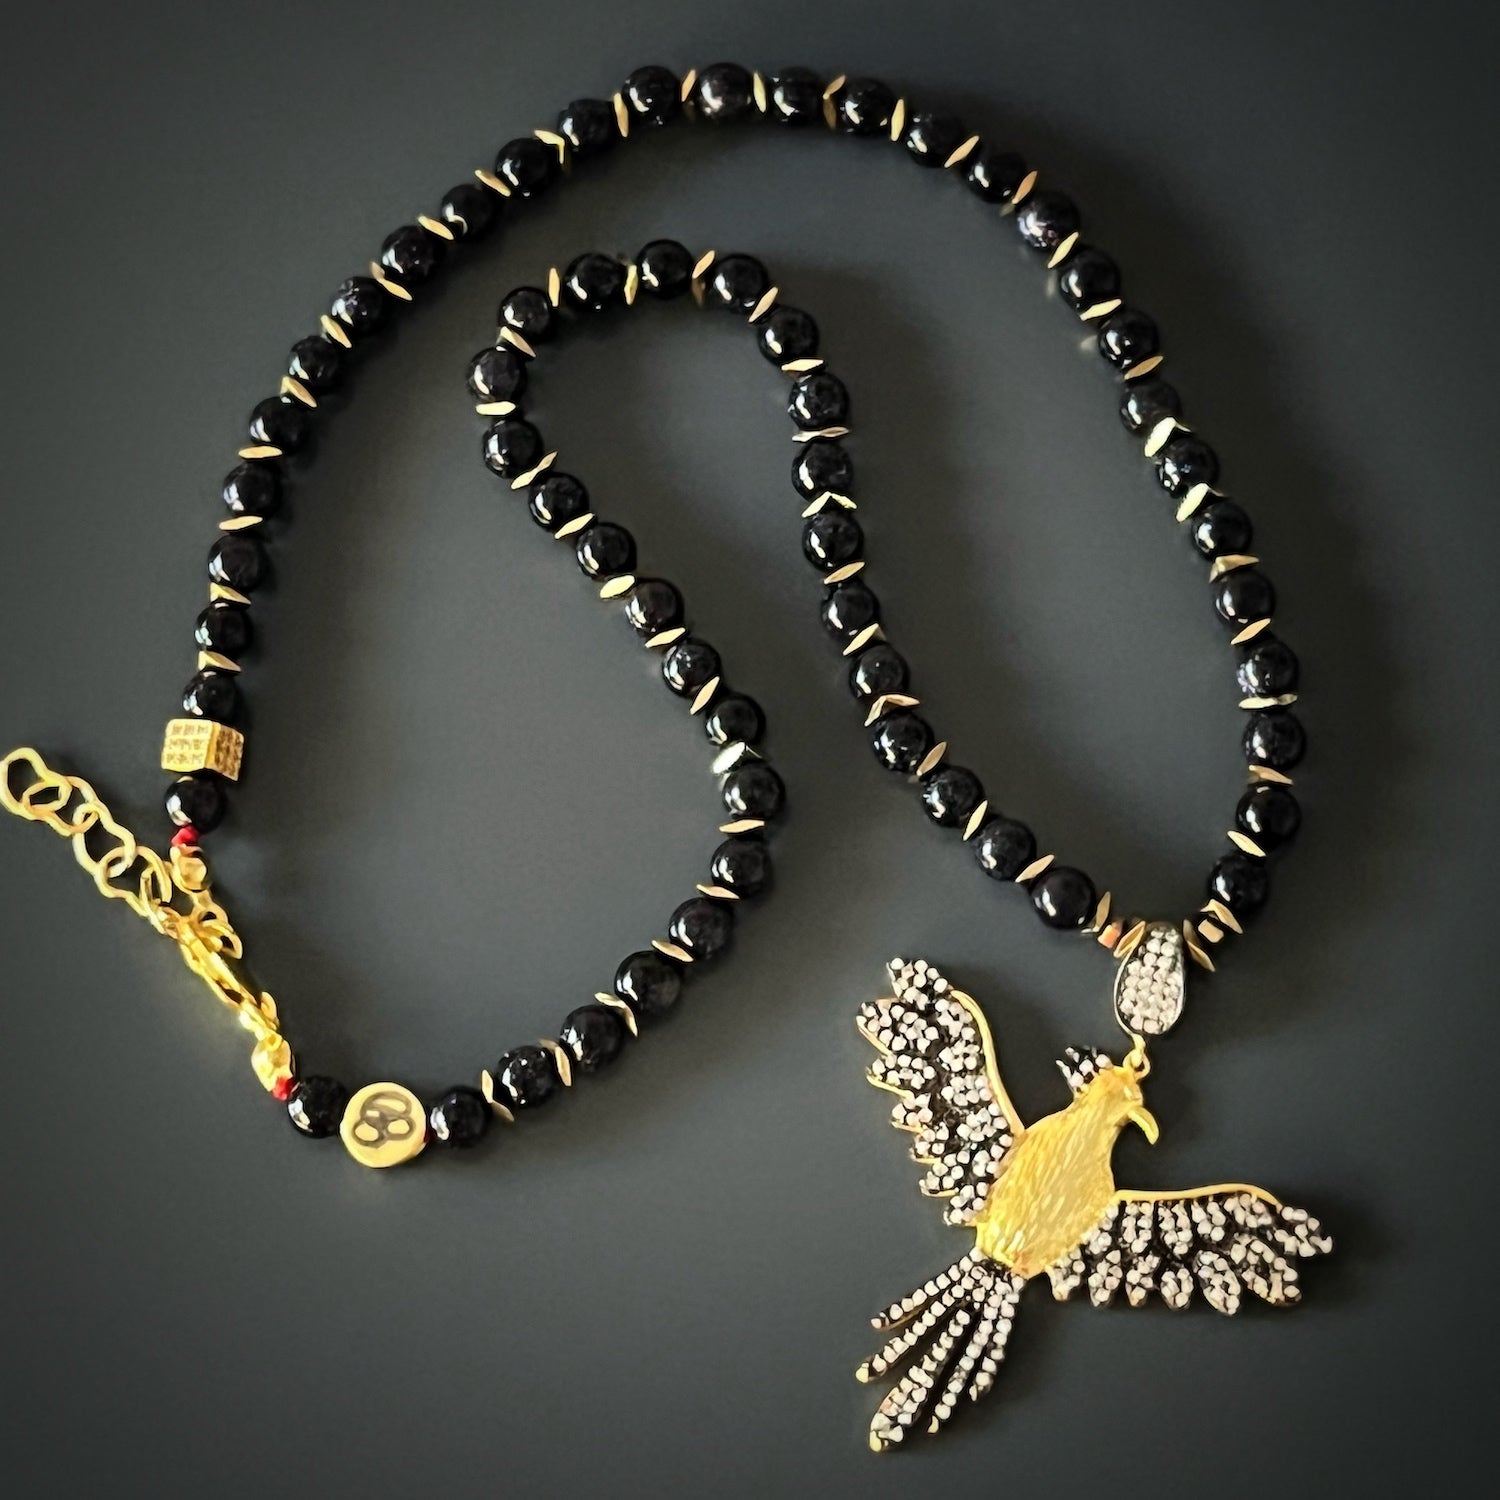 Awaken the spirit of rebirth with the Magical Phoenix Bird Necklace, adorned with elegant star stone beads and a symbolic phoenix pendant.